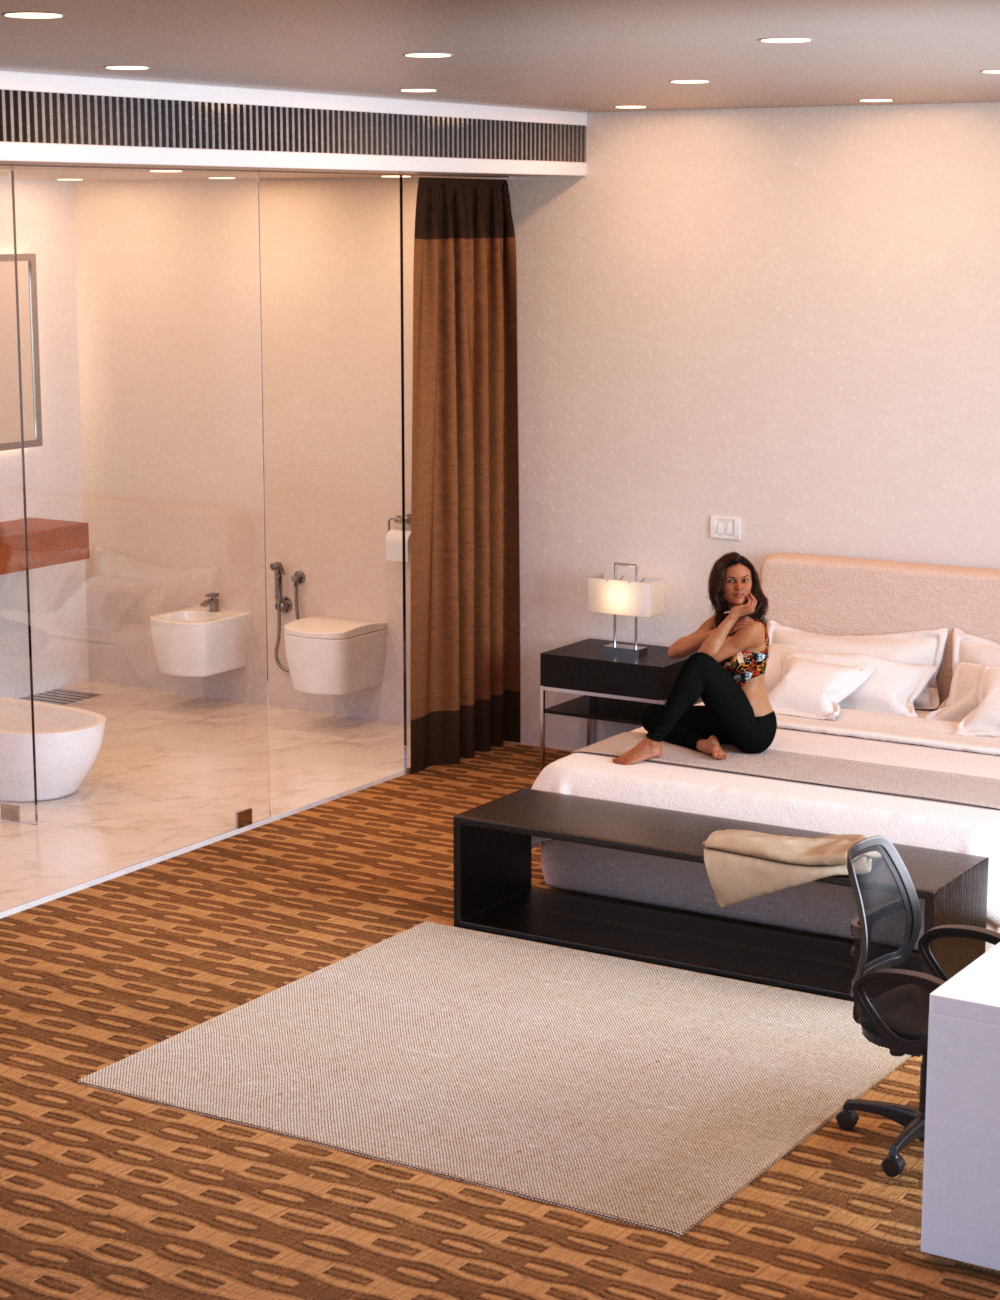 Luxury Hotel Room by: Charlie, 3D Models by Daz 3D